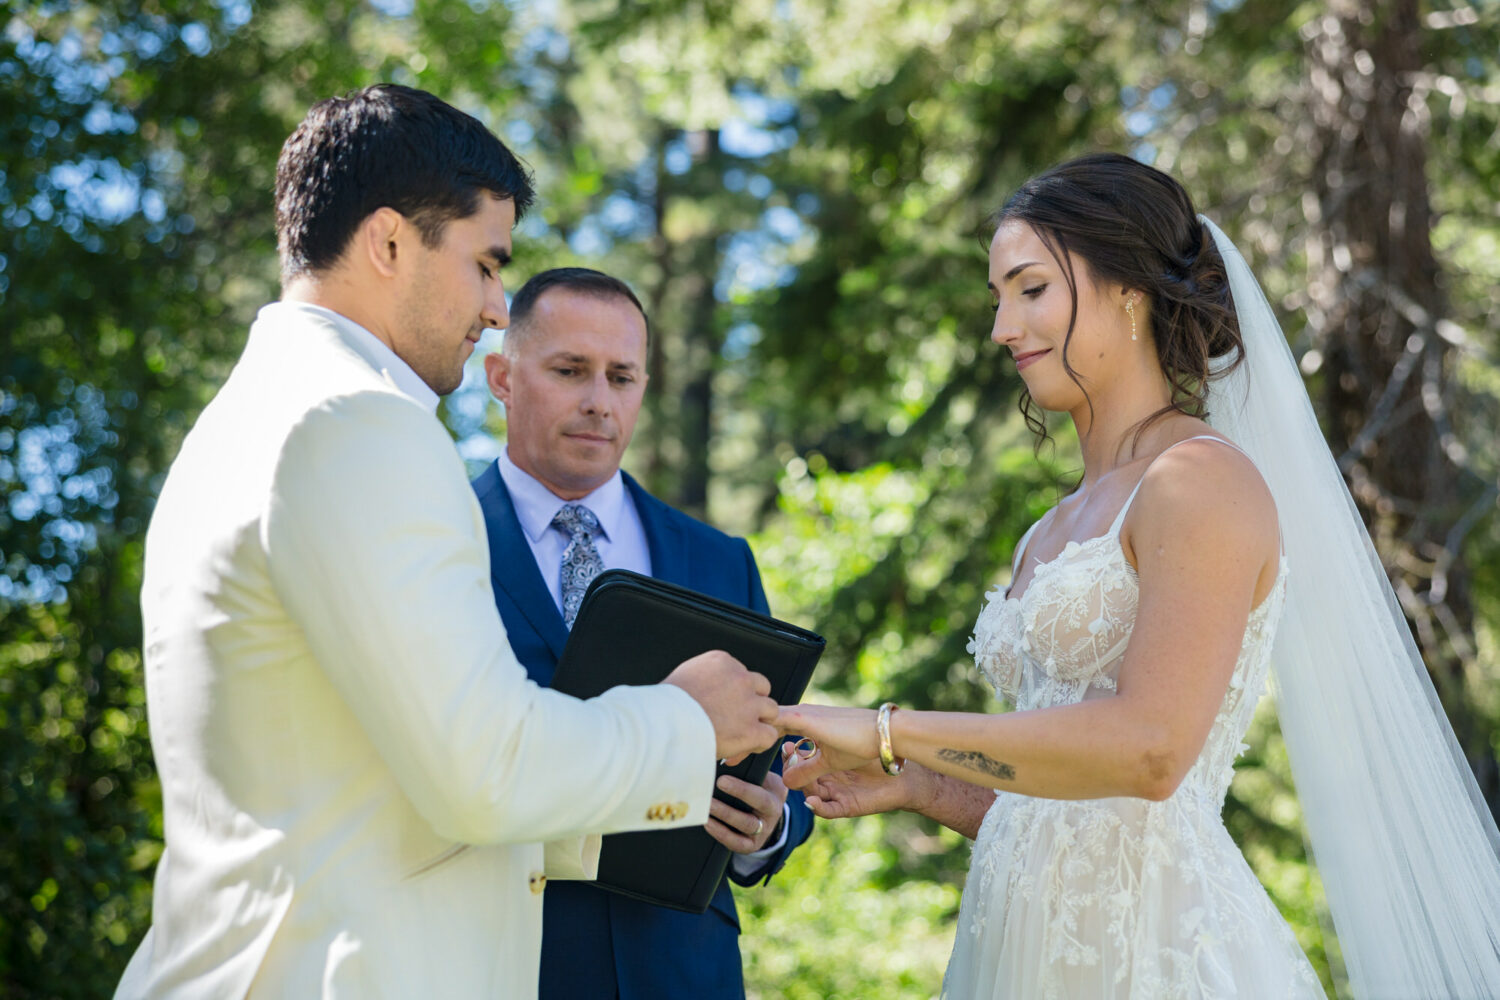 Exchanging rings at a summer wedding at Aspen Grove in Incline Village.